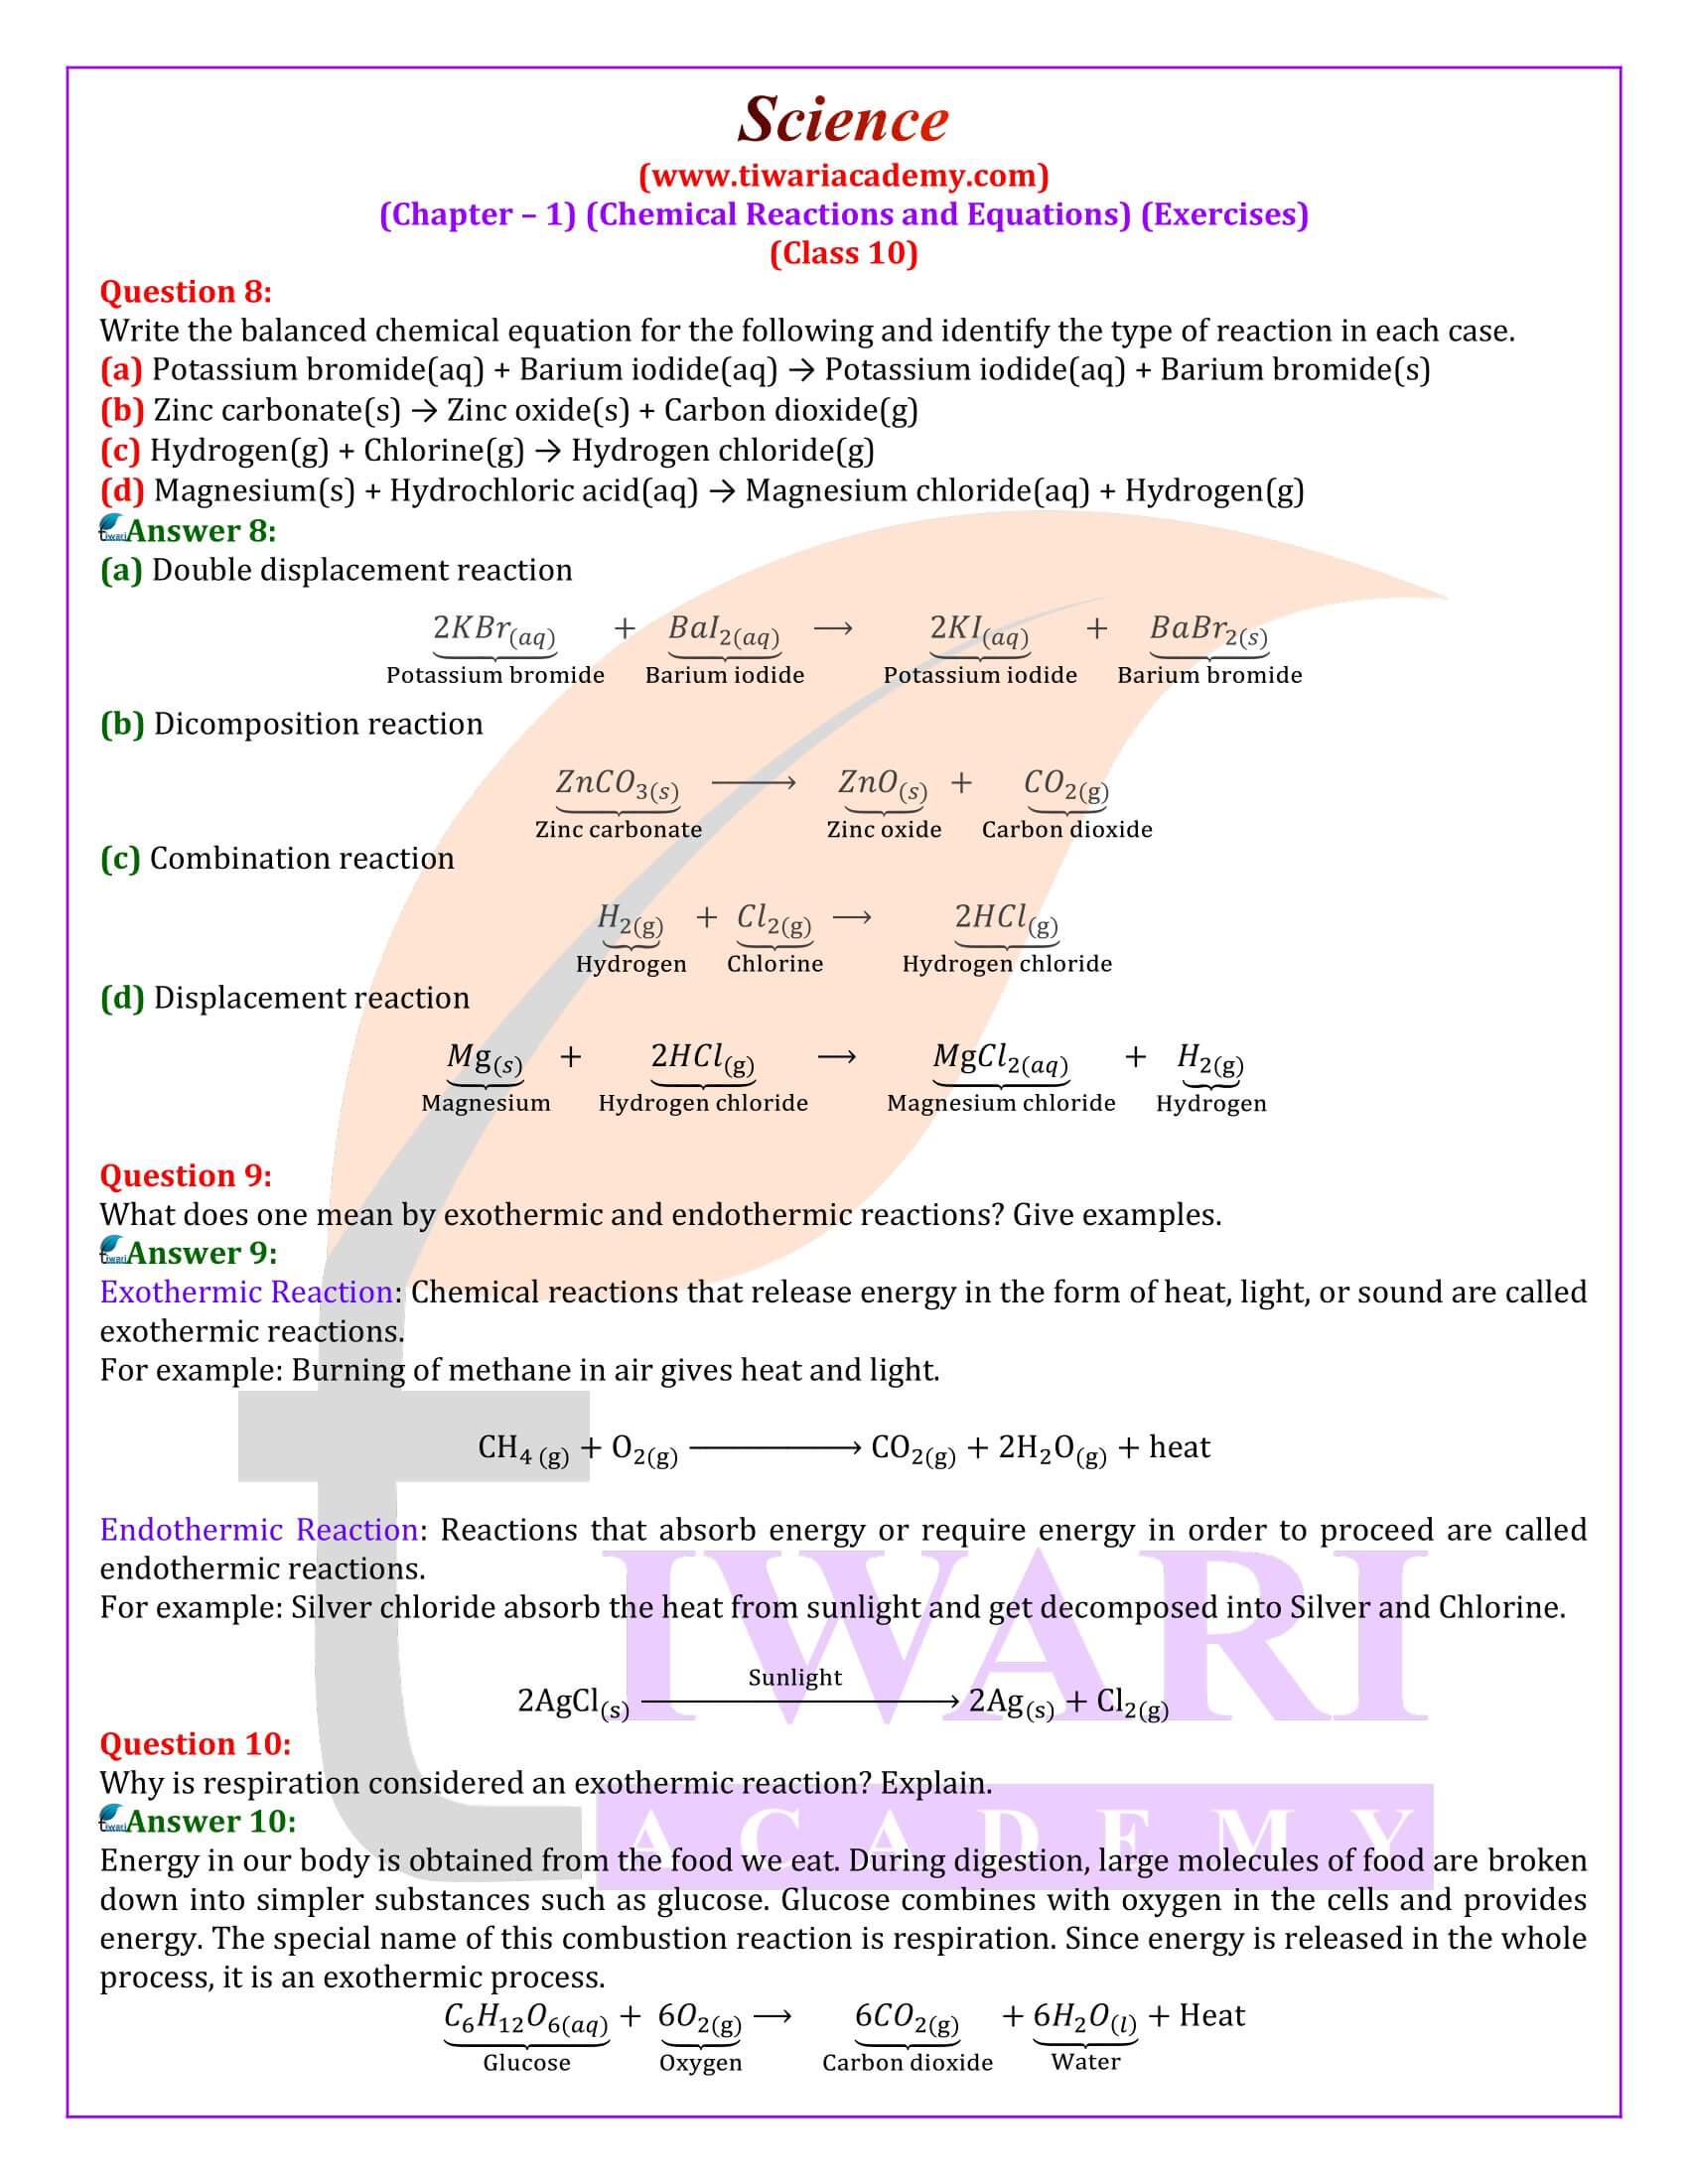 NCERT Solutions for Class 10 Science Chapter 1 Exercises